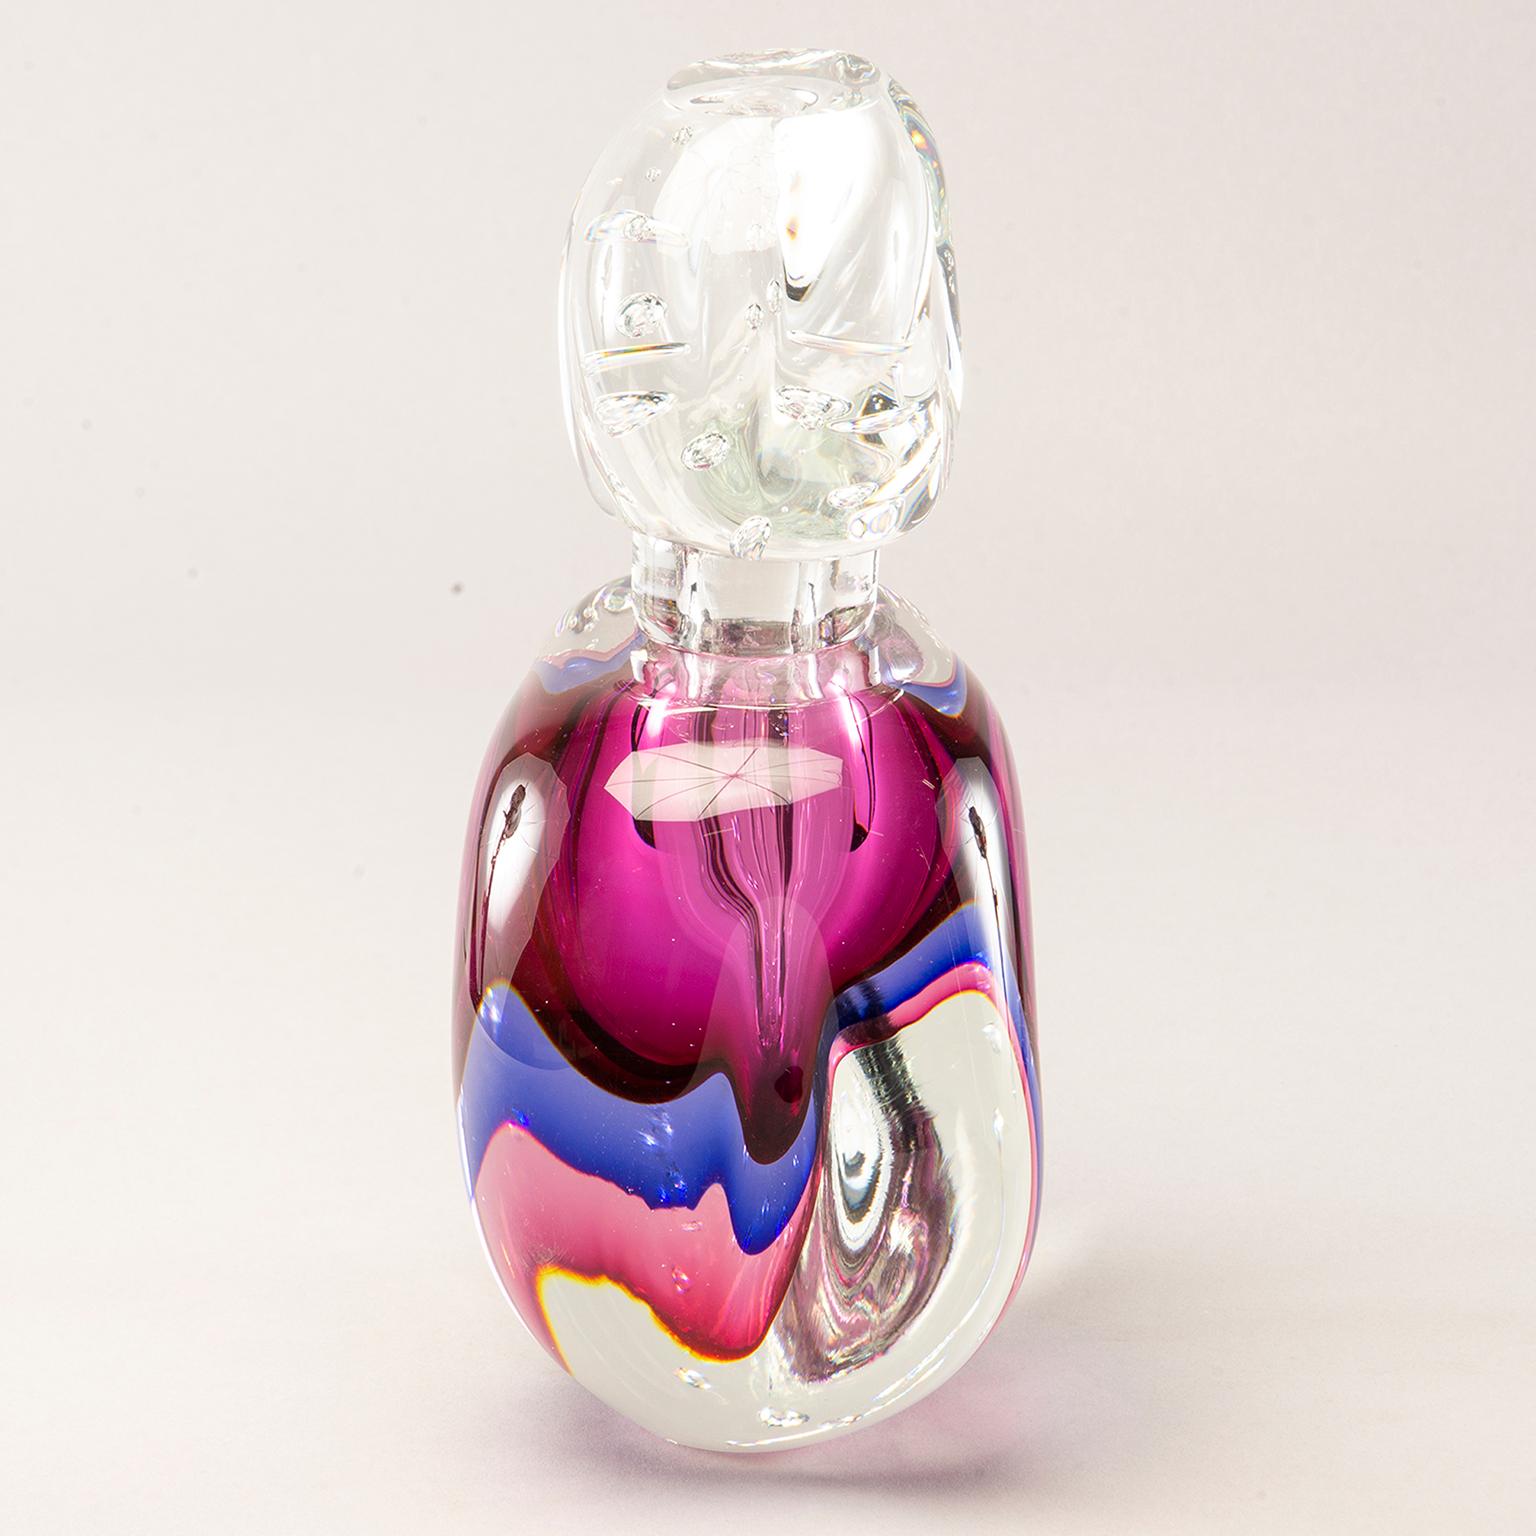 New handmade oversized Murano glass perfume bottle. Thick clear glass with Sommerso style layers of magenta, blue and pink glass. Large, clear stopper. Other perfume bottles in various shapes and colors also available at time of this posting.